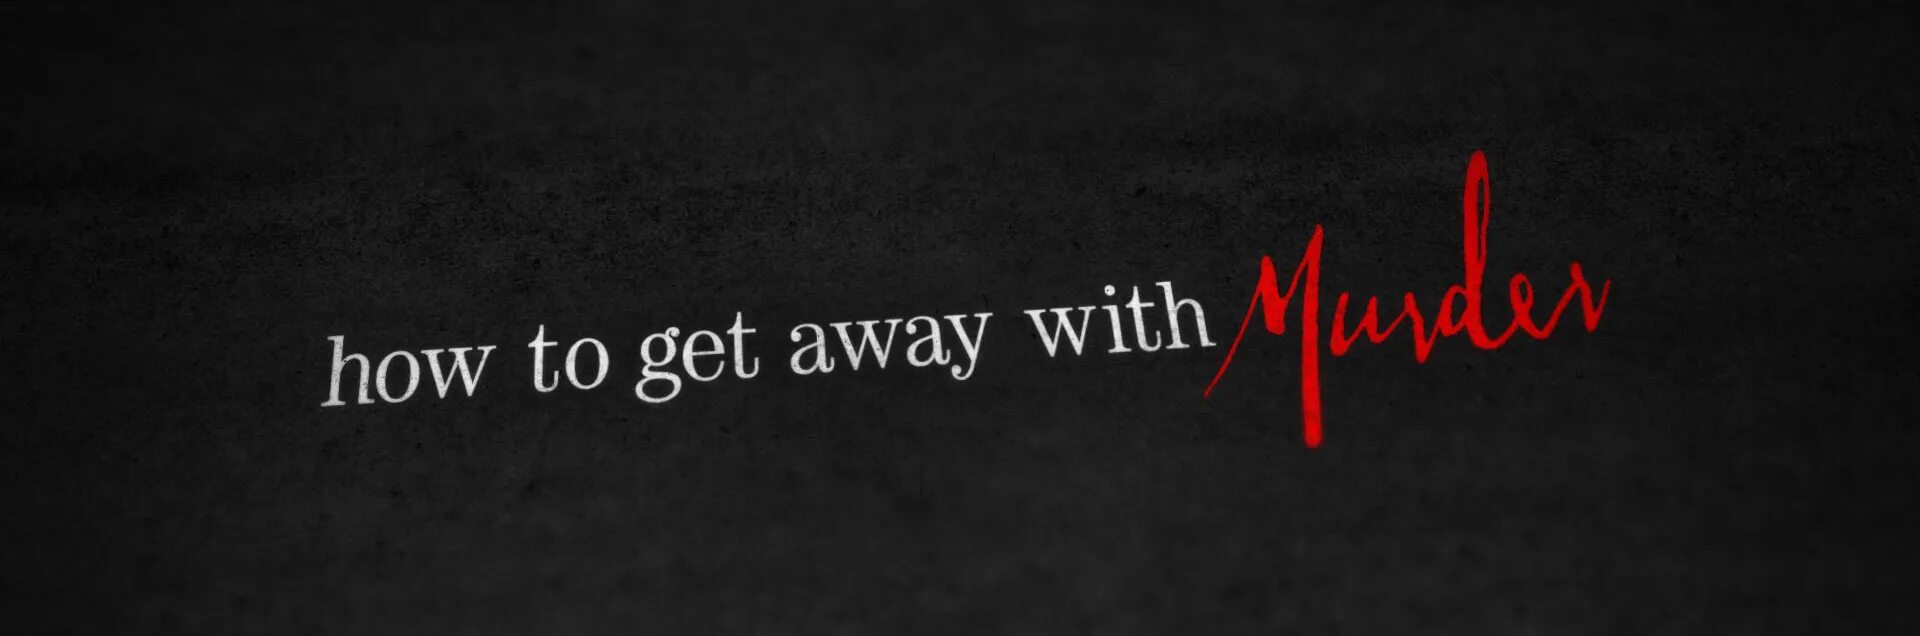 I want to get away. How to get away with Murder moments. Getting away with Murder обложка альбома.